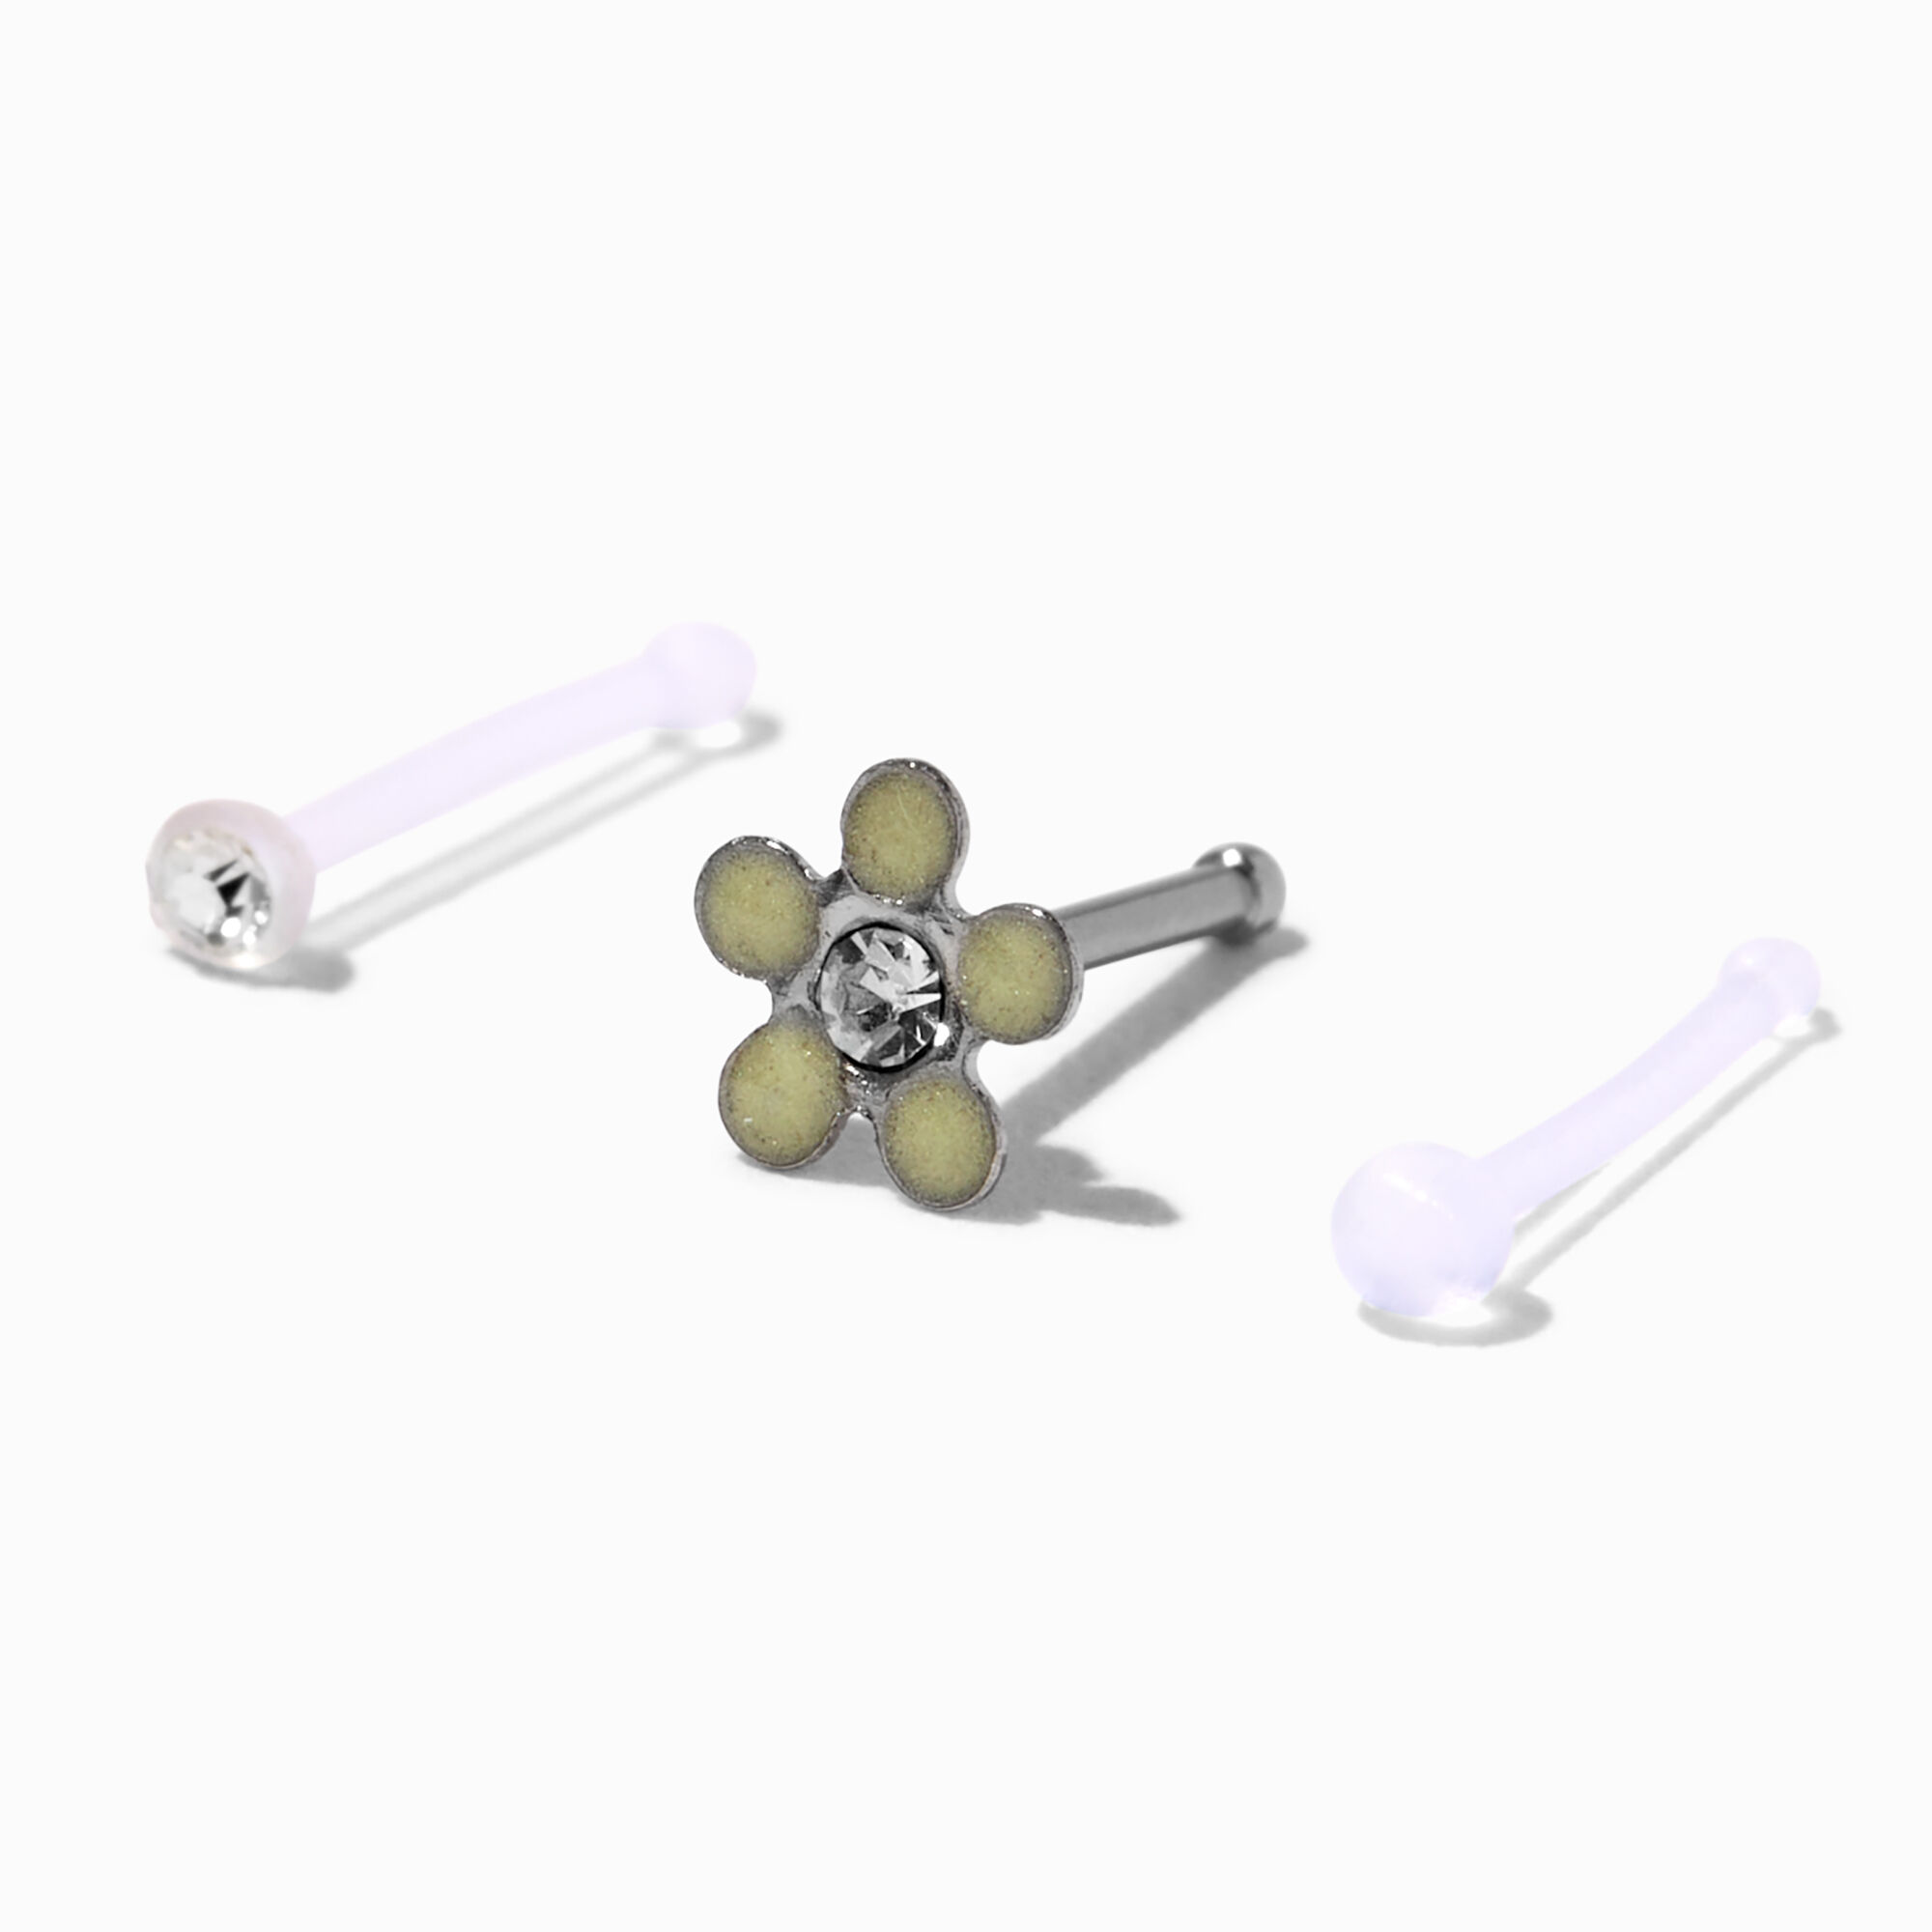 View Claires Tone Glow In The Dark Daisy Mixed Stone 20G Nose Rings 3 Pack Silver information